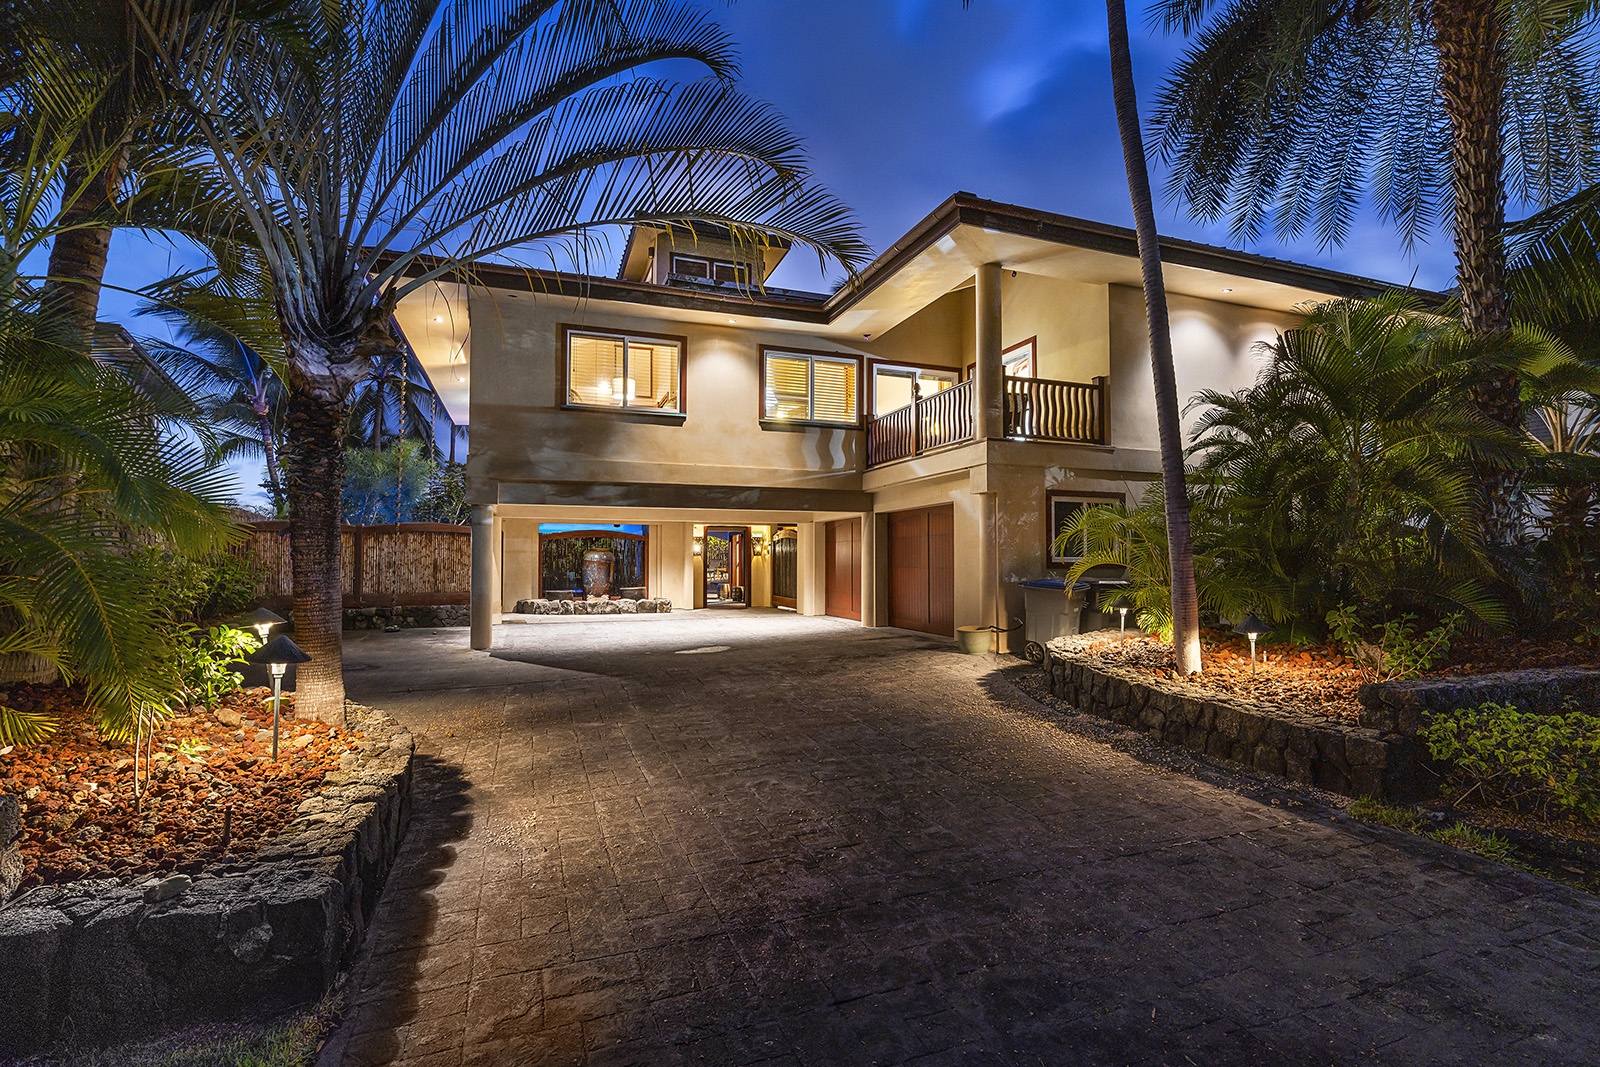 Kailua Kona Vacation Rentals, Mermaid Cove - Entrance to the house in the evening